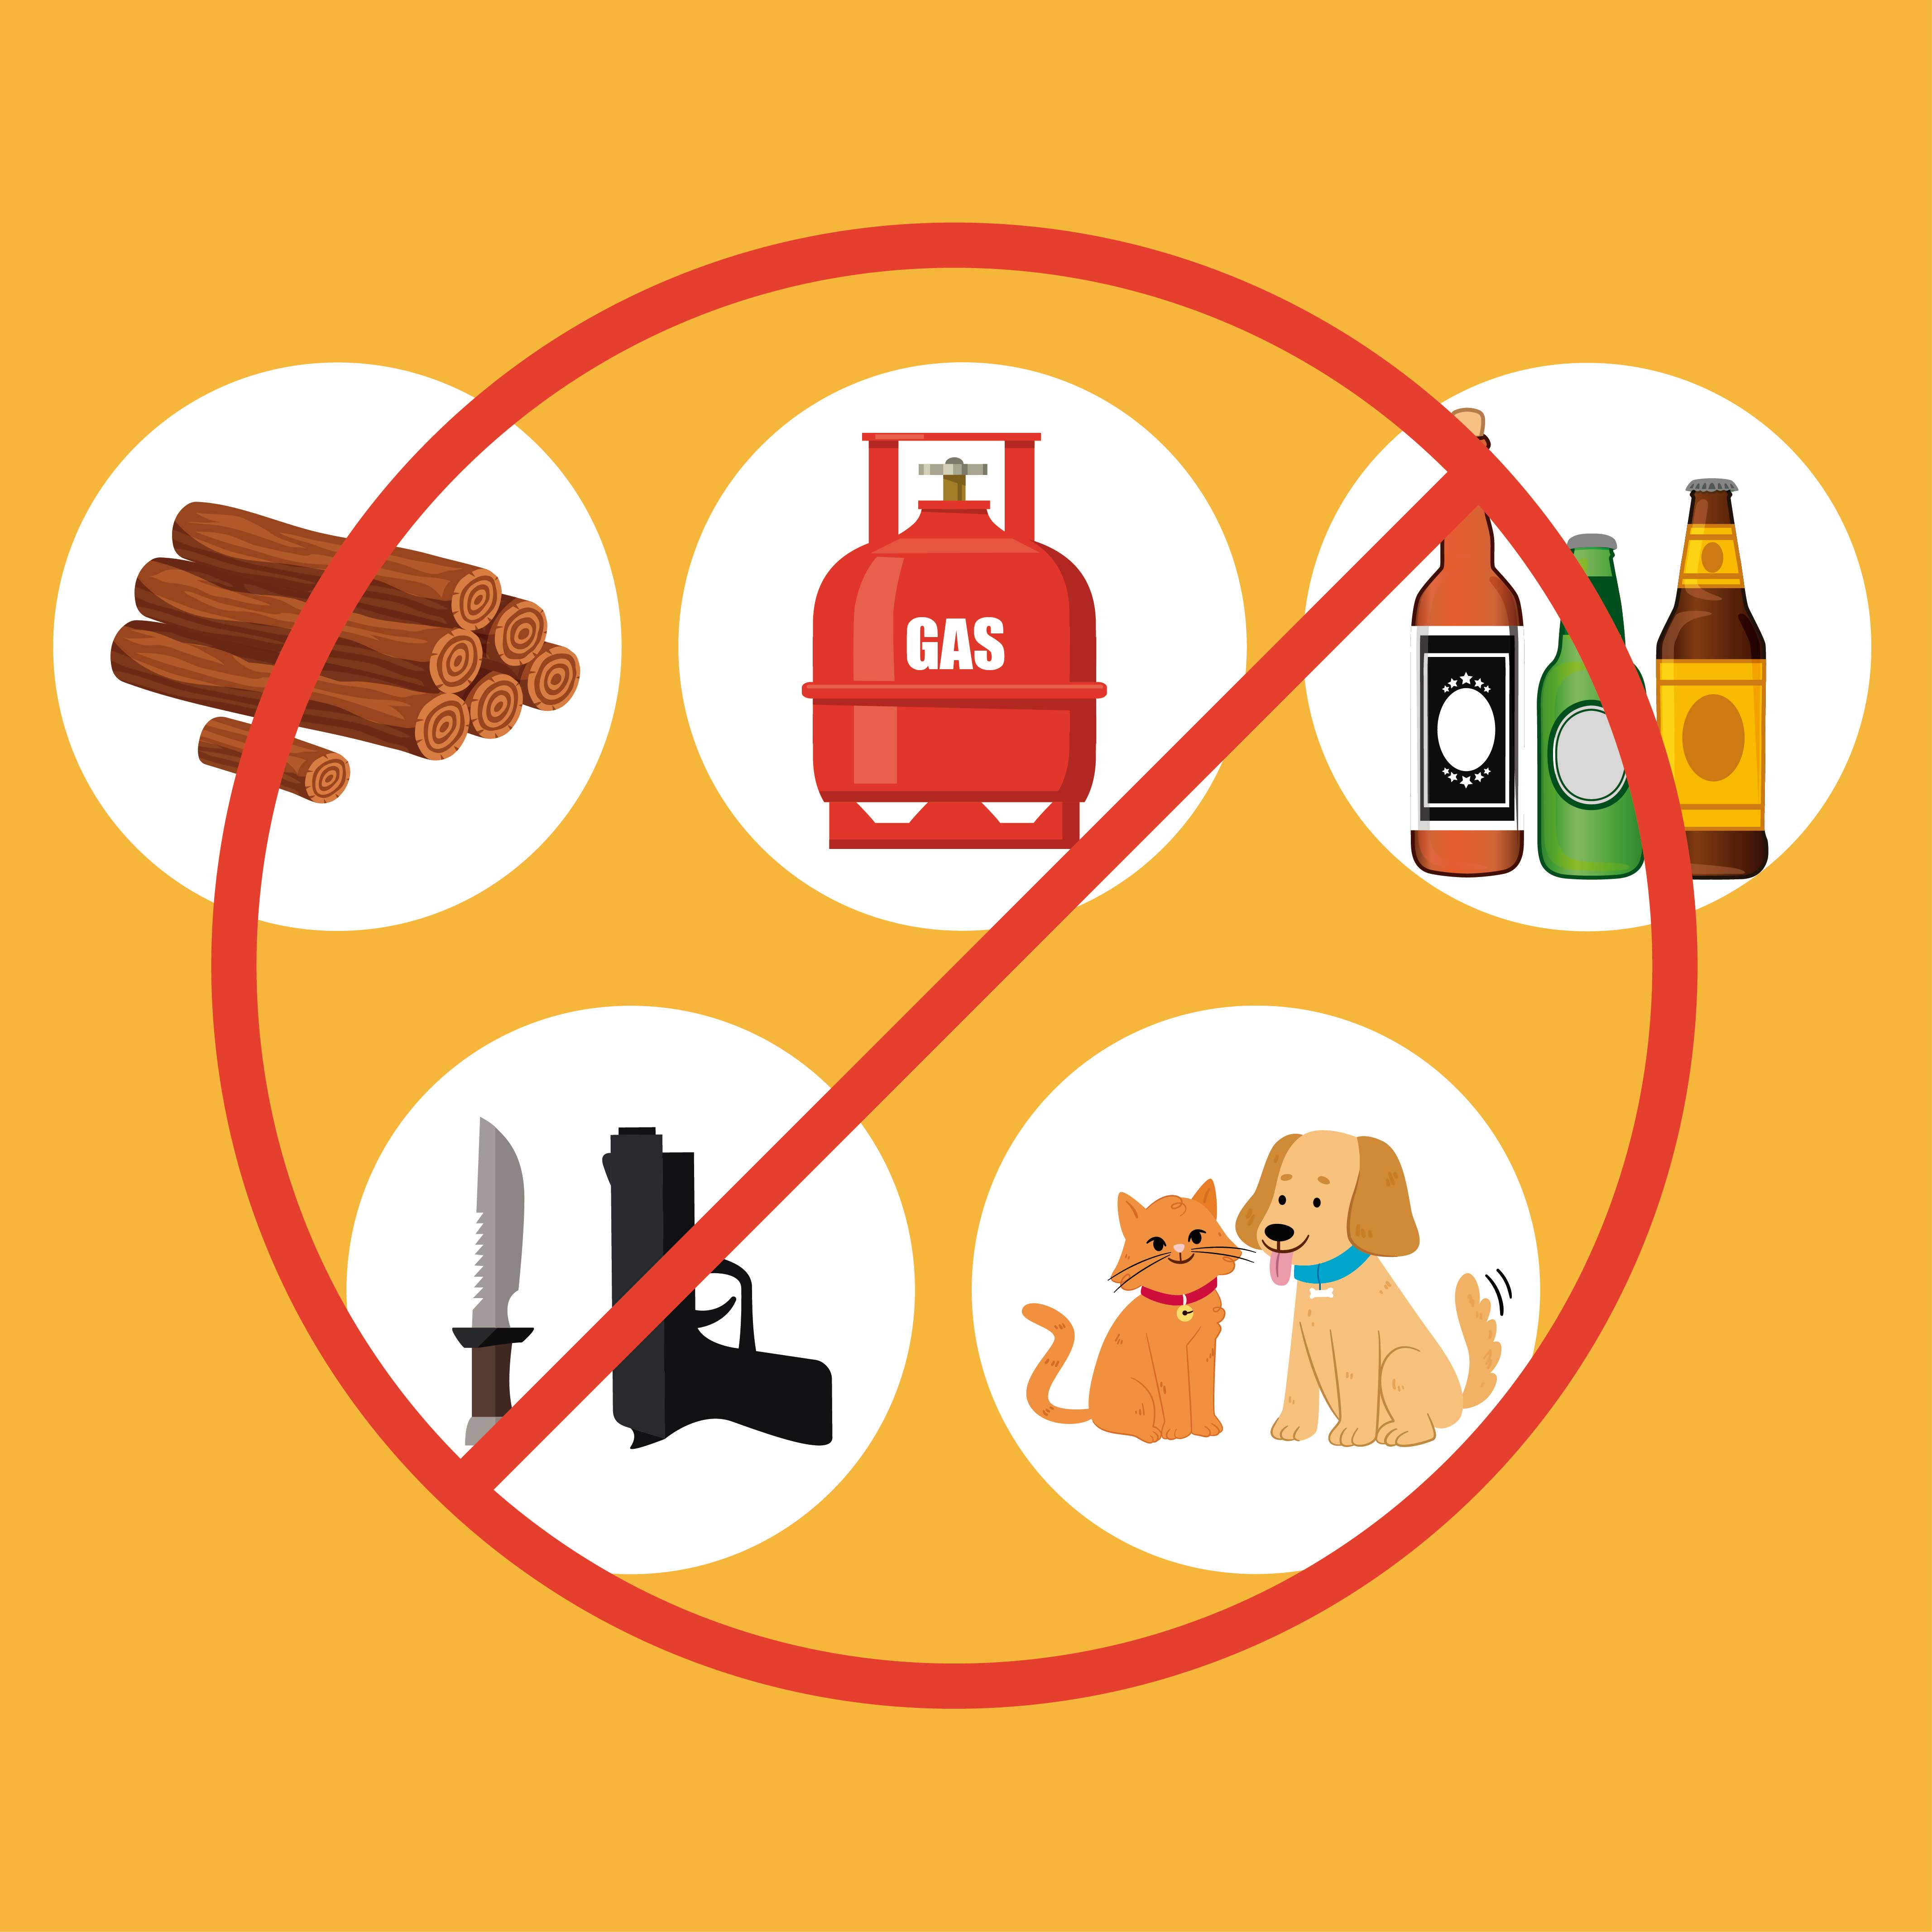 Entering the park with firewood, gas tanks, or alcoholic beverages is not allowed